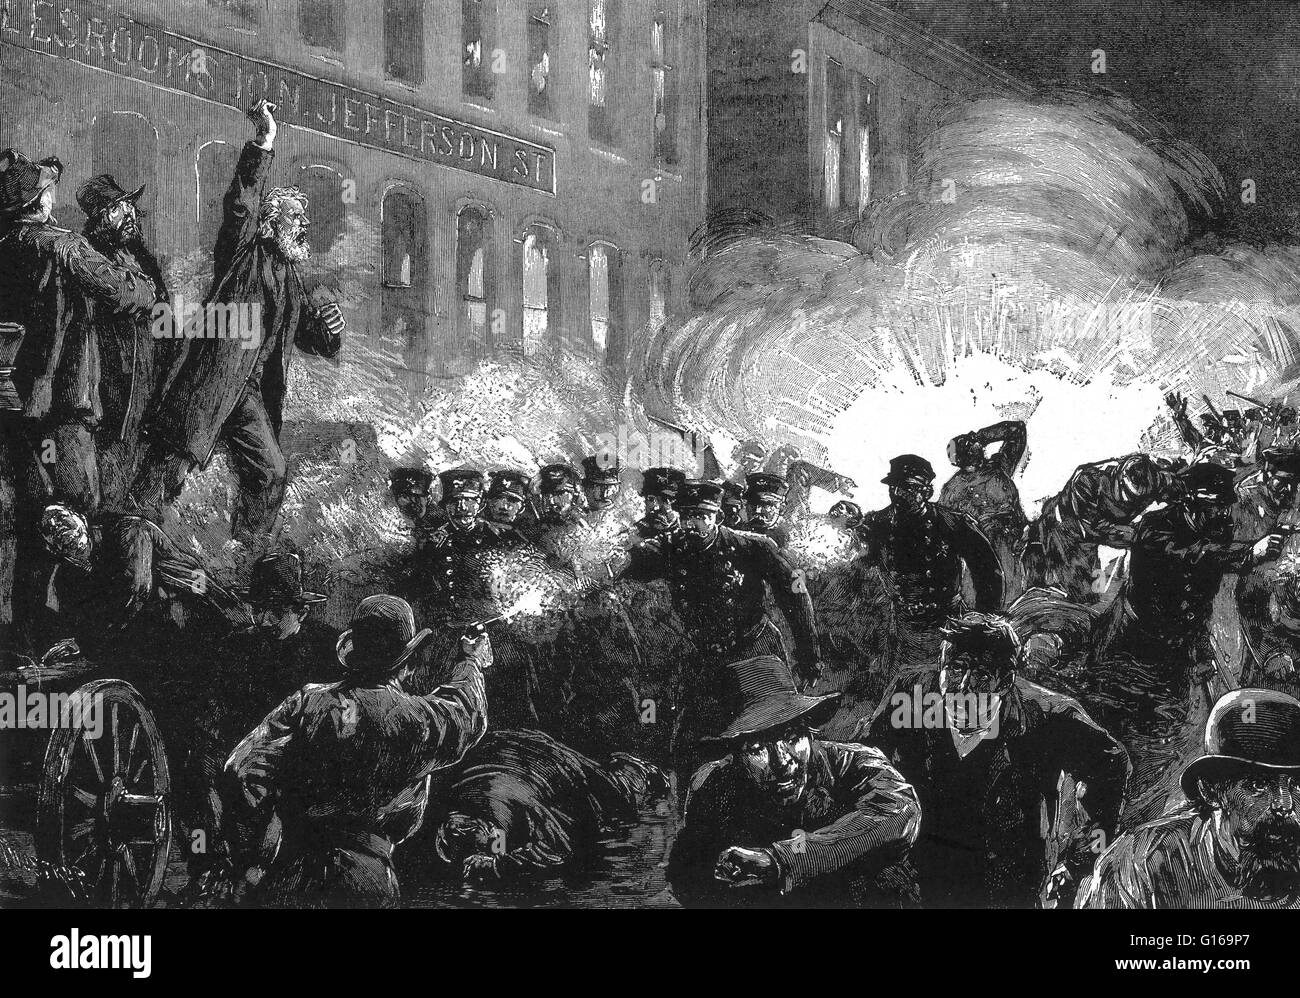 The Haymarket affair refers to the aftermath of a bombing that took place at a labor demonstration on May 4, 1886, at Haymarket Square in Chicago. It began as a peaceful rally in support of workers striking for an eight-hour day. An unknown person threw a dynamite bomb at police as they acted to disperse the public meeting. The bomb blast and ensuing gunfire resulted in the deaths of seven police officers, four civilians and many seriously wounded. In the internationally publicized legal proceedings that followed, eight anarchists were convicted of conspiracy. The evidence was that one of the  Stock Photo